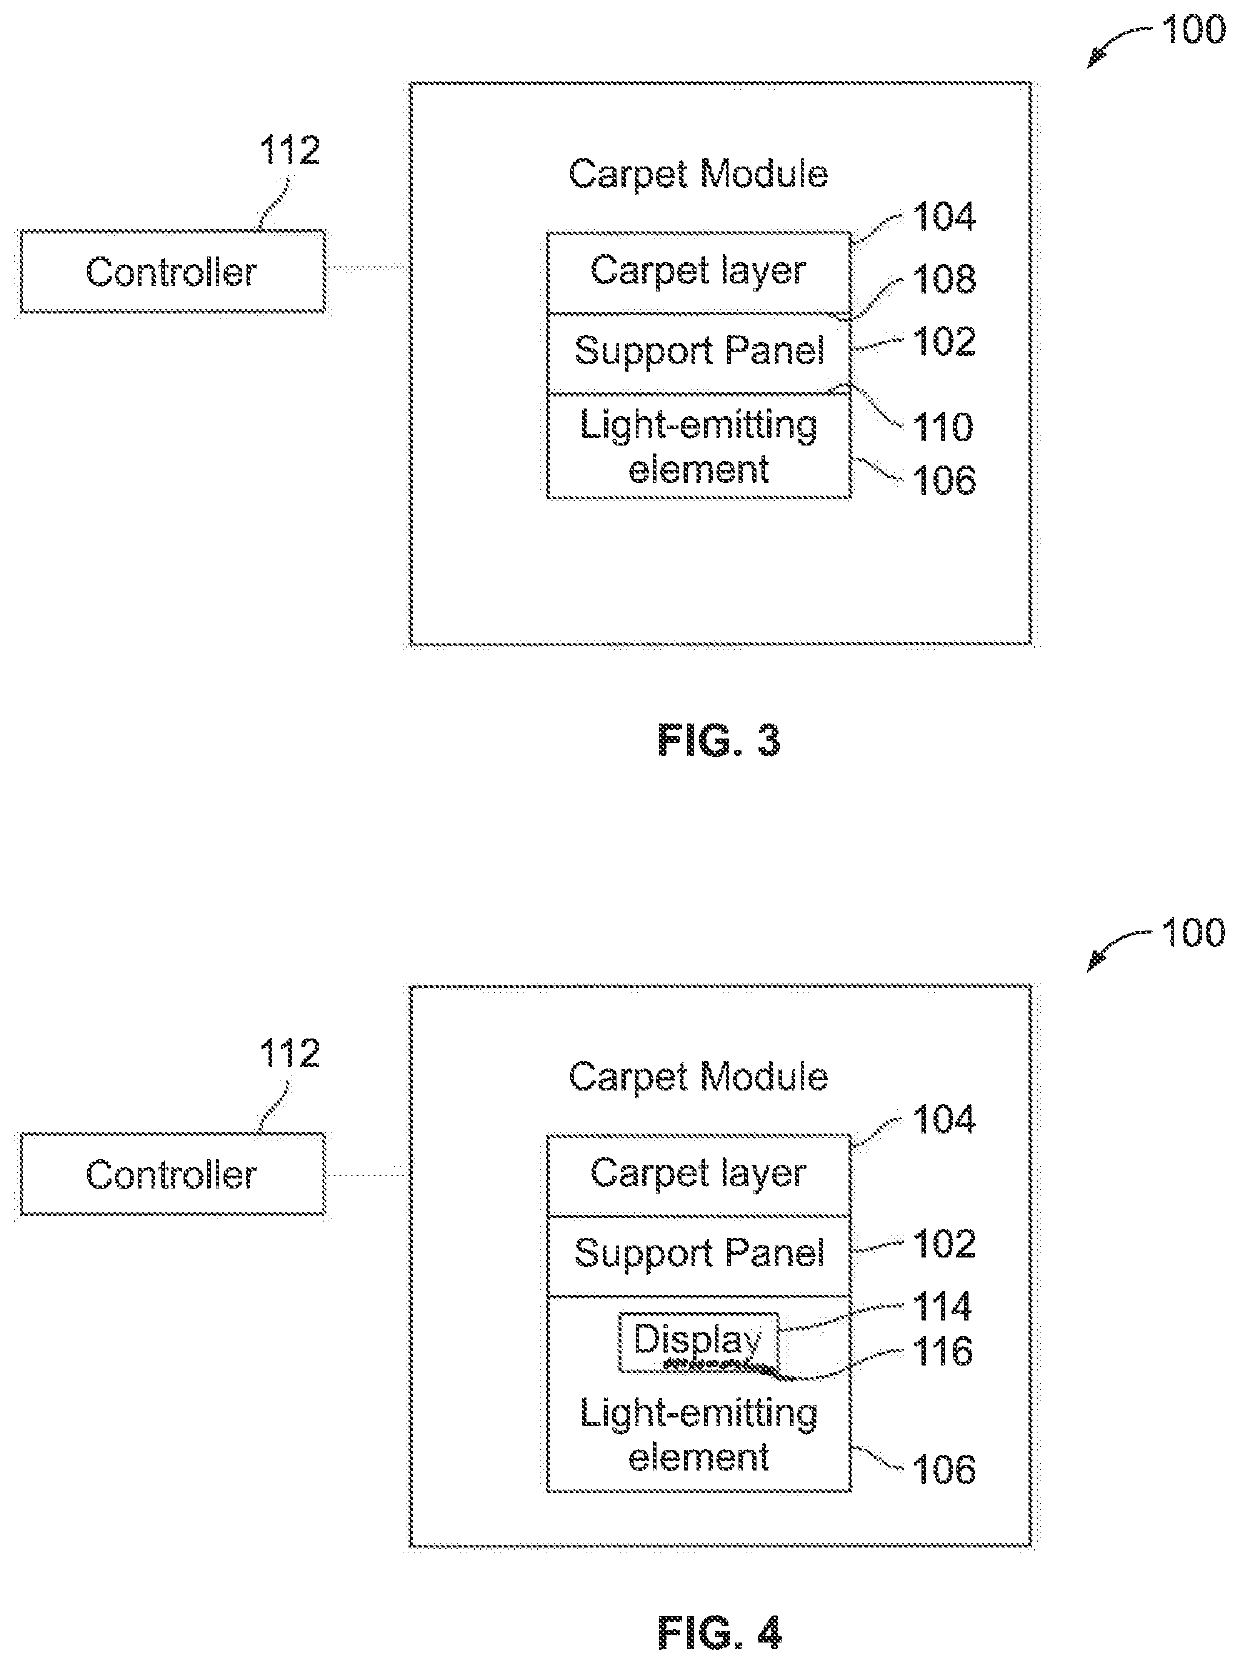 Carpet display systems and methods